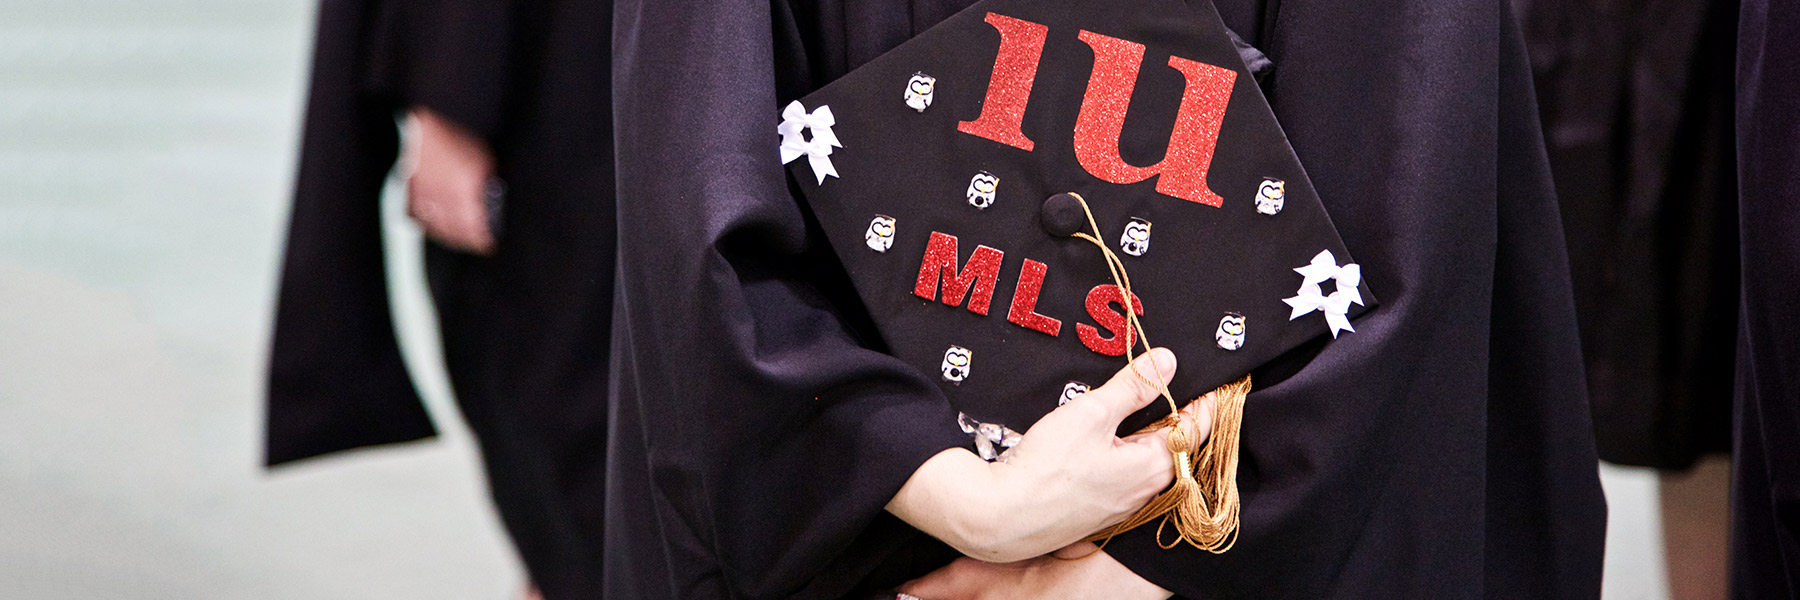 A student wearing a graduation gown shows the top of her graduation cap, which says M.L.S. in red tape.